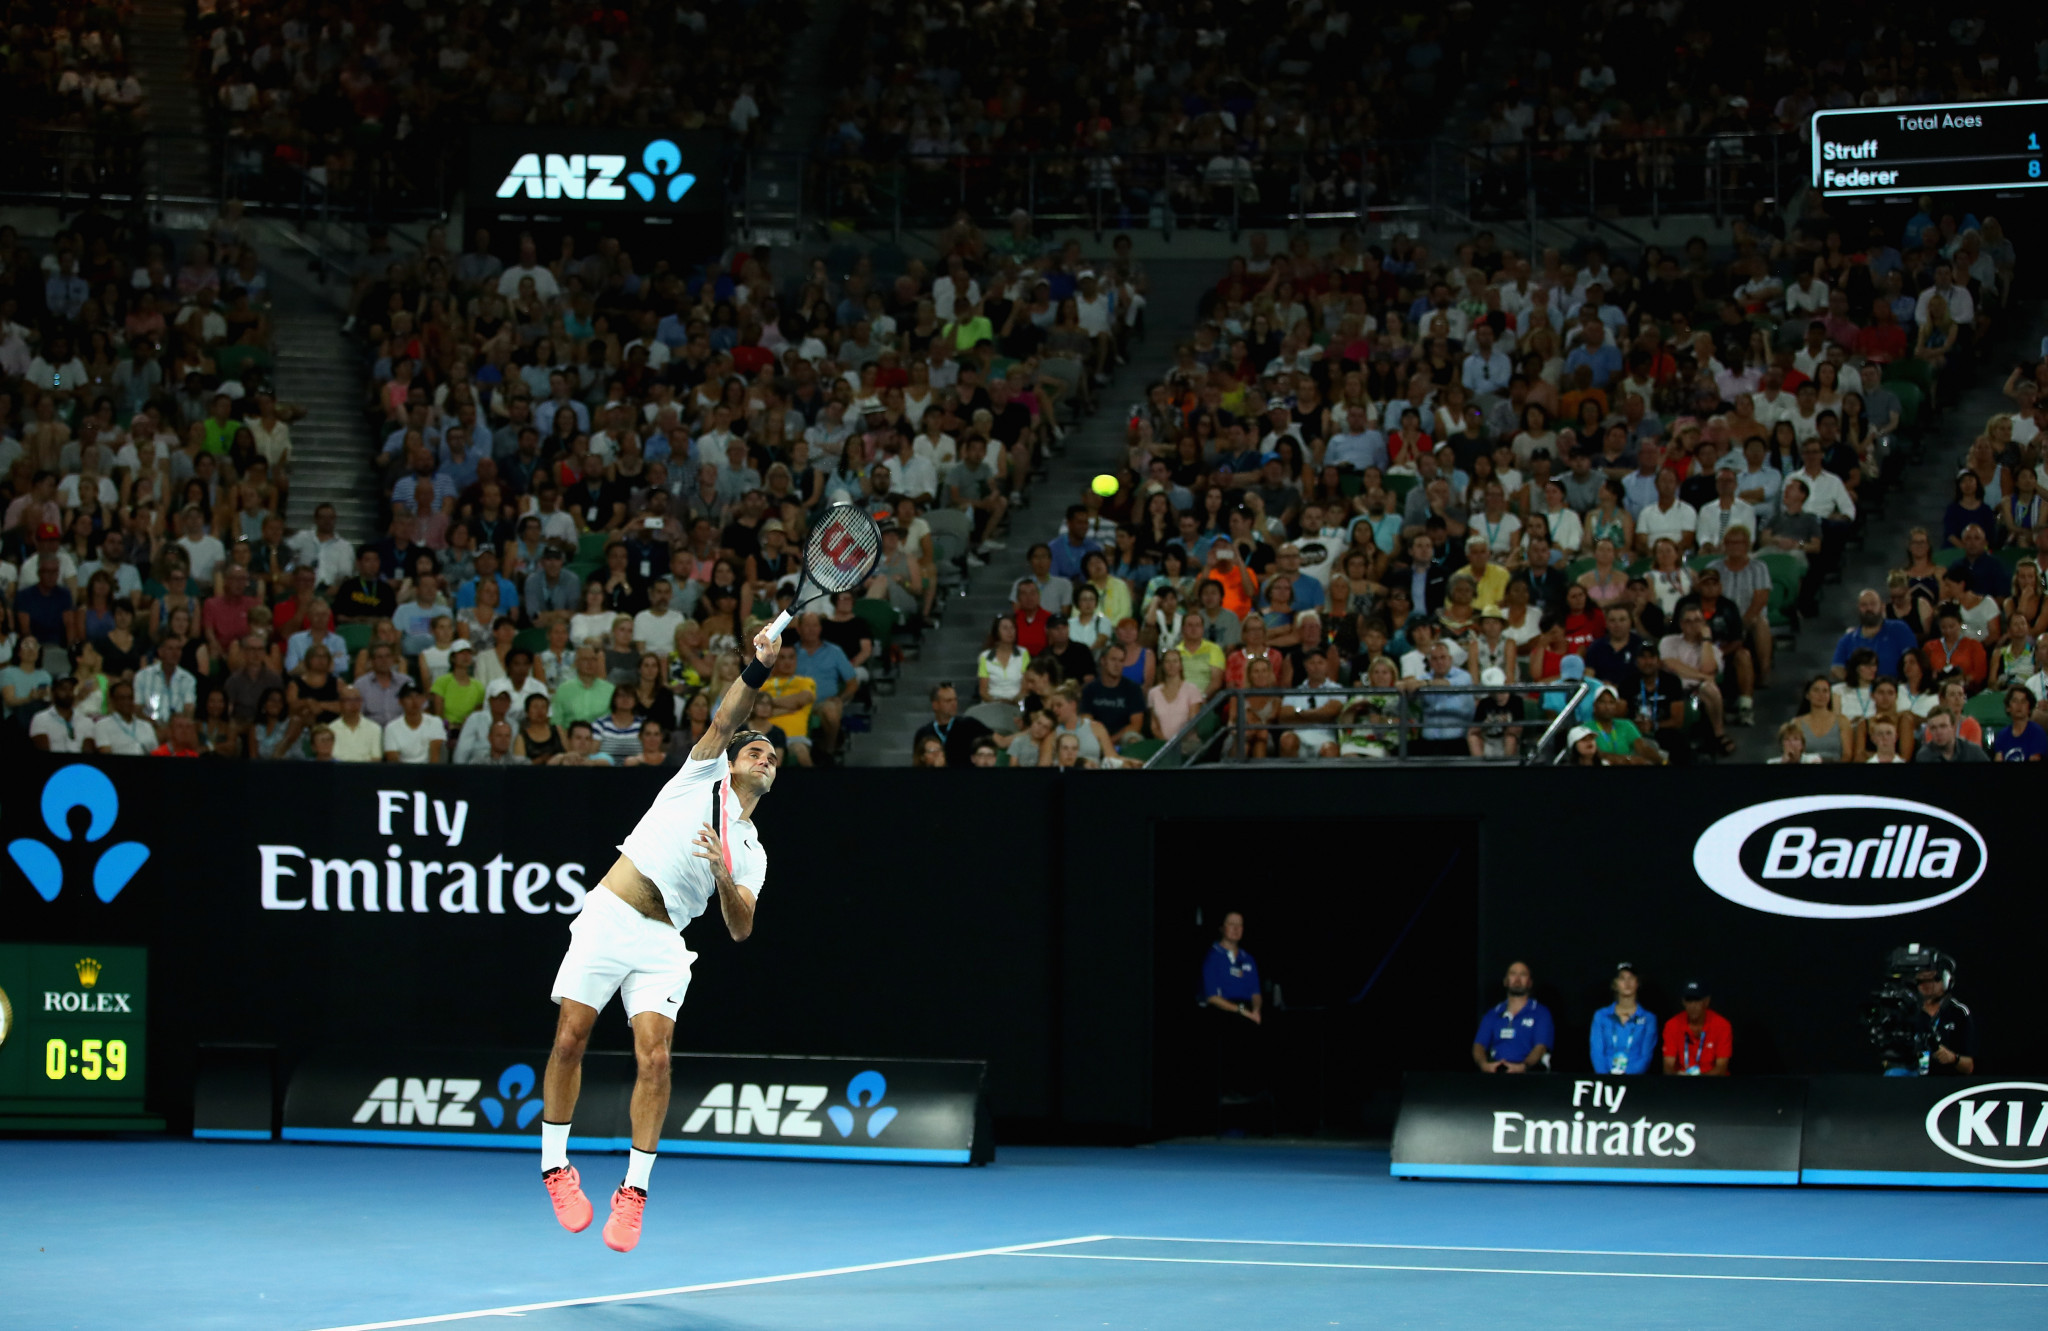 Federer and Halep win on day four of Australian Open